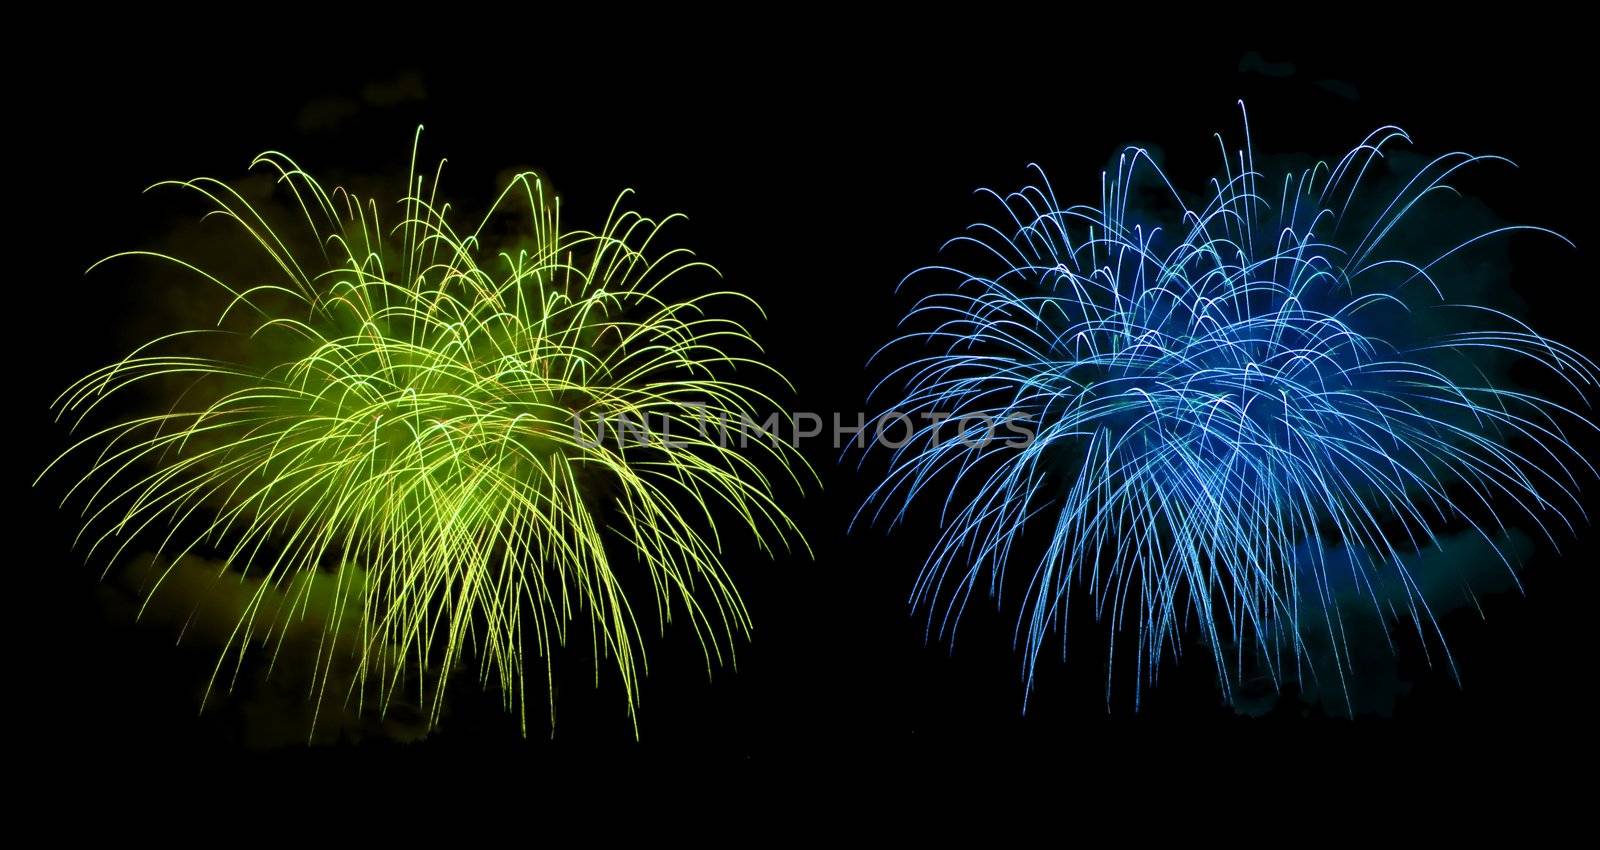 Fireworks Lighting up the Sky by werg